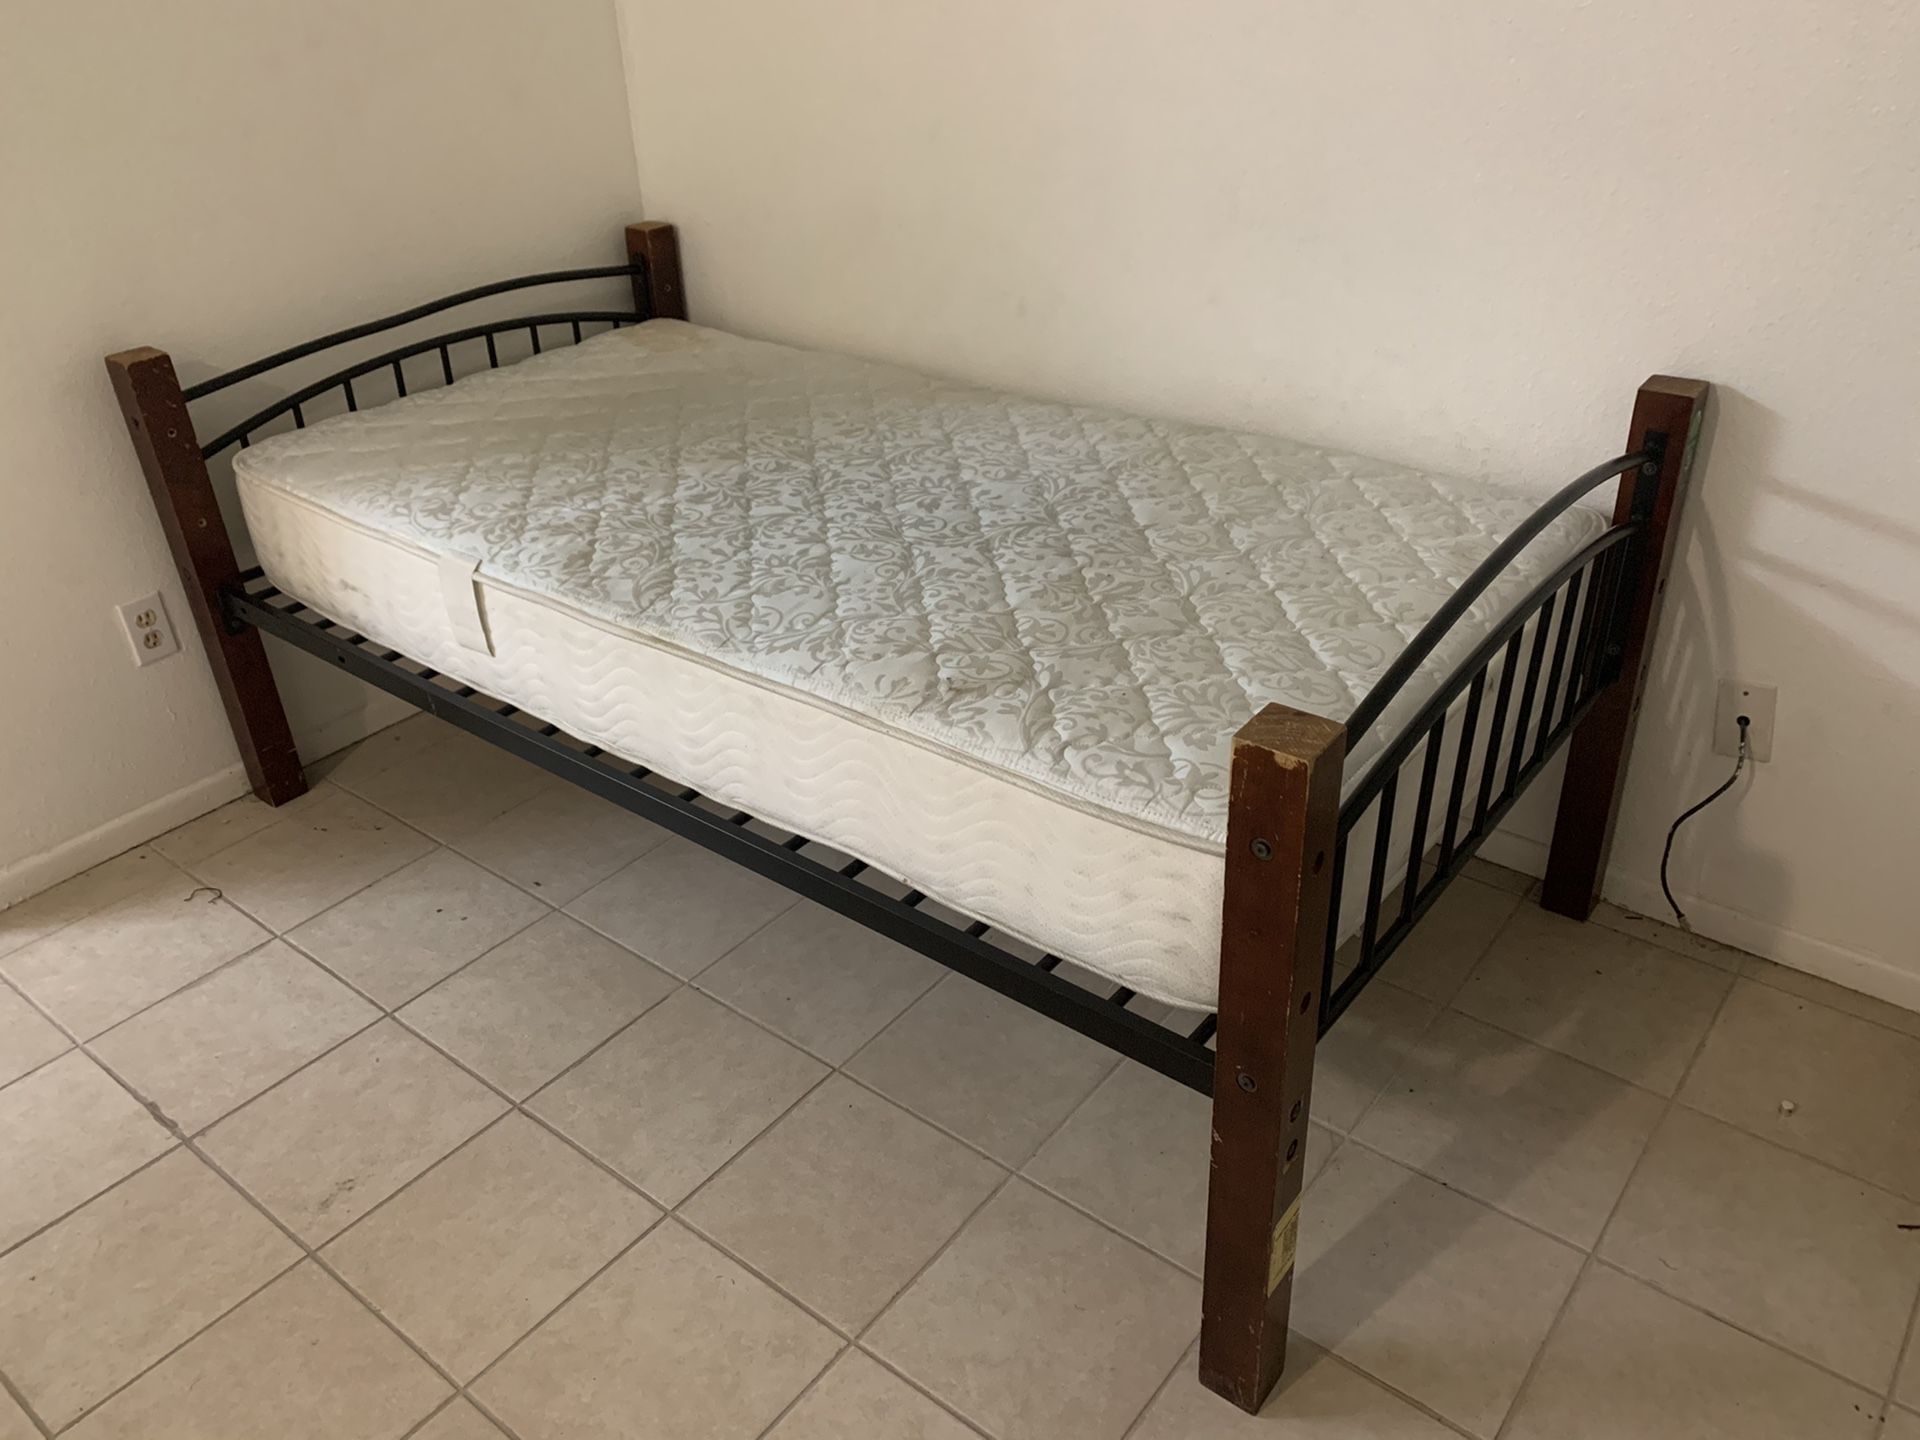 Twin bed-mattress and frame